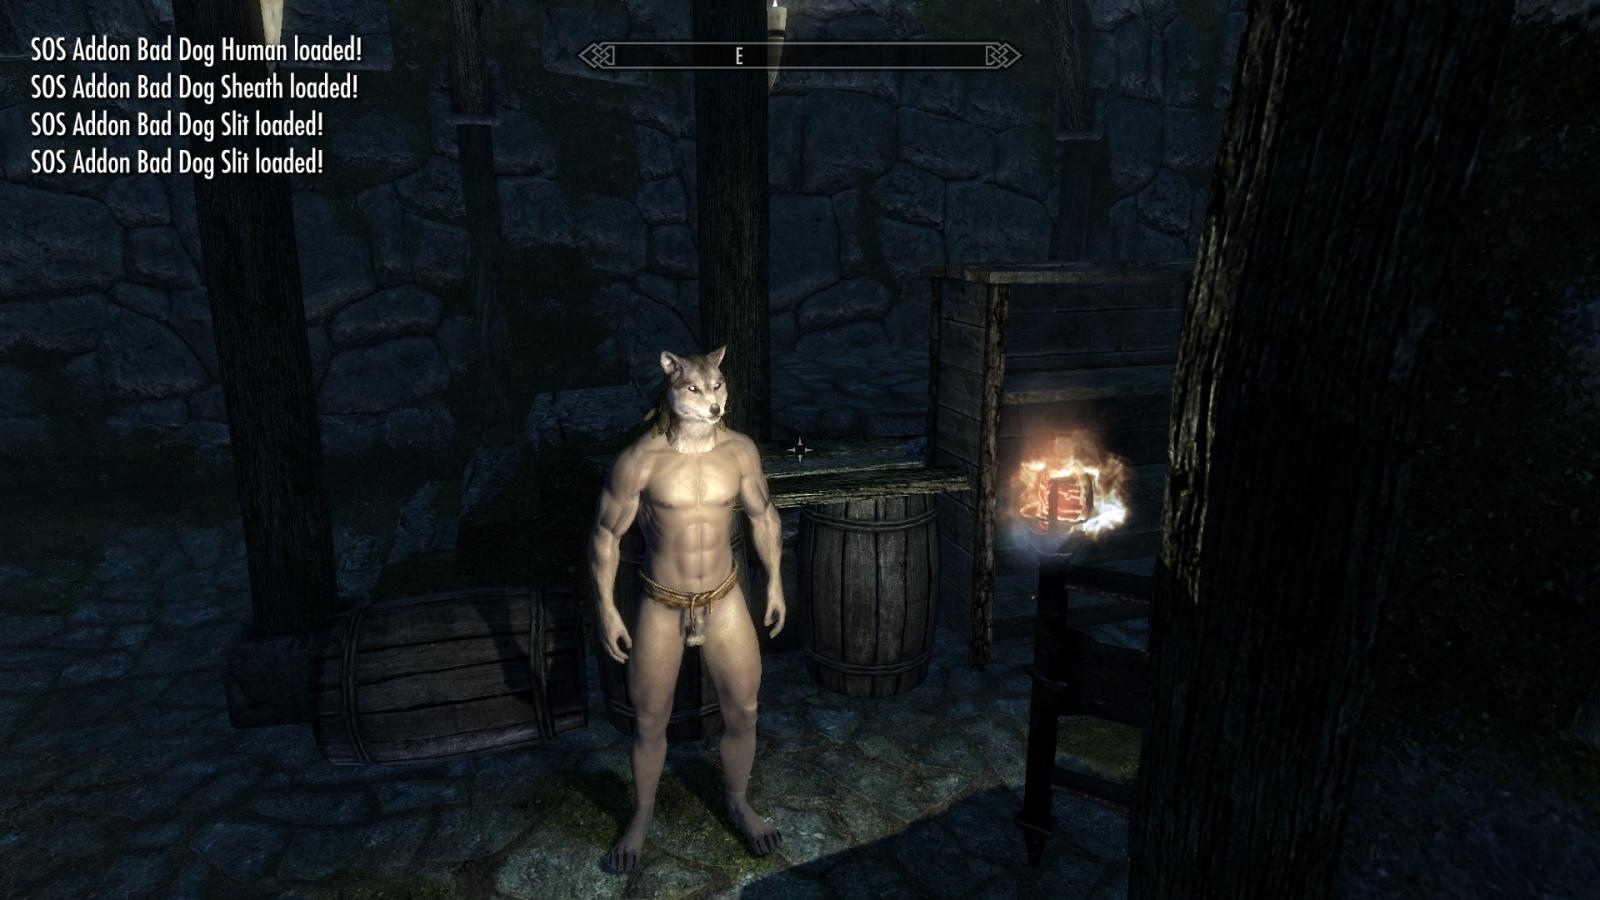 Yiffy Age Of Skyrim Page 30 Downloads Skyrim Adult And Sex Mods 